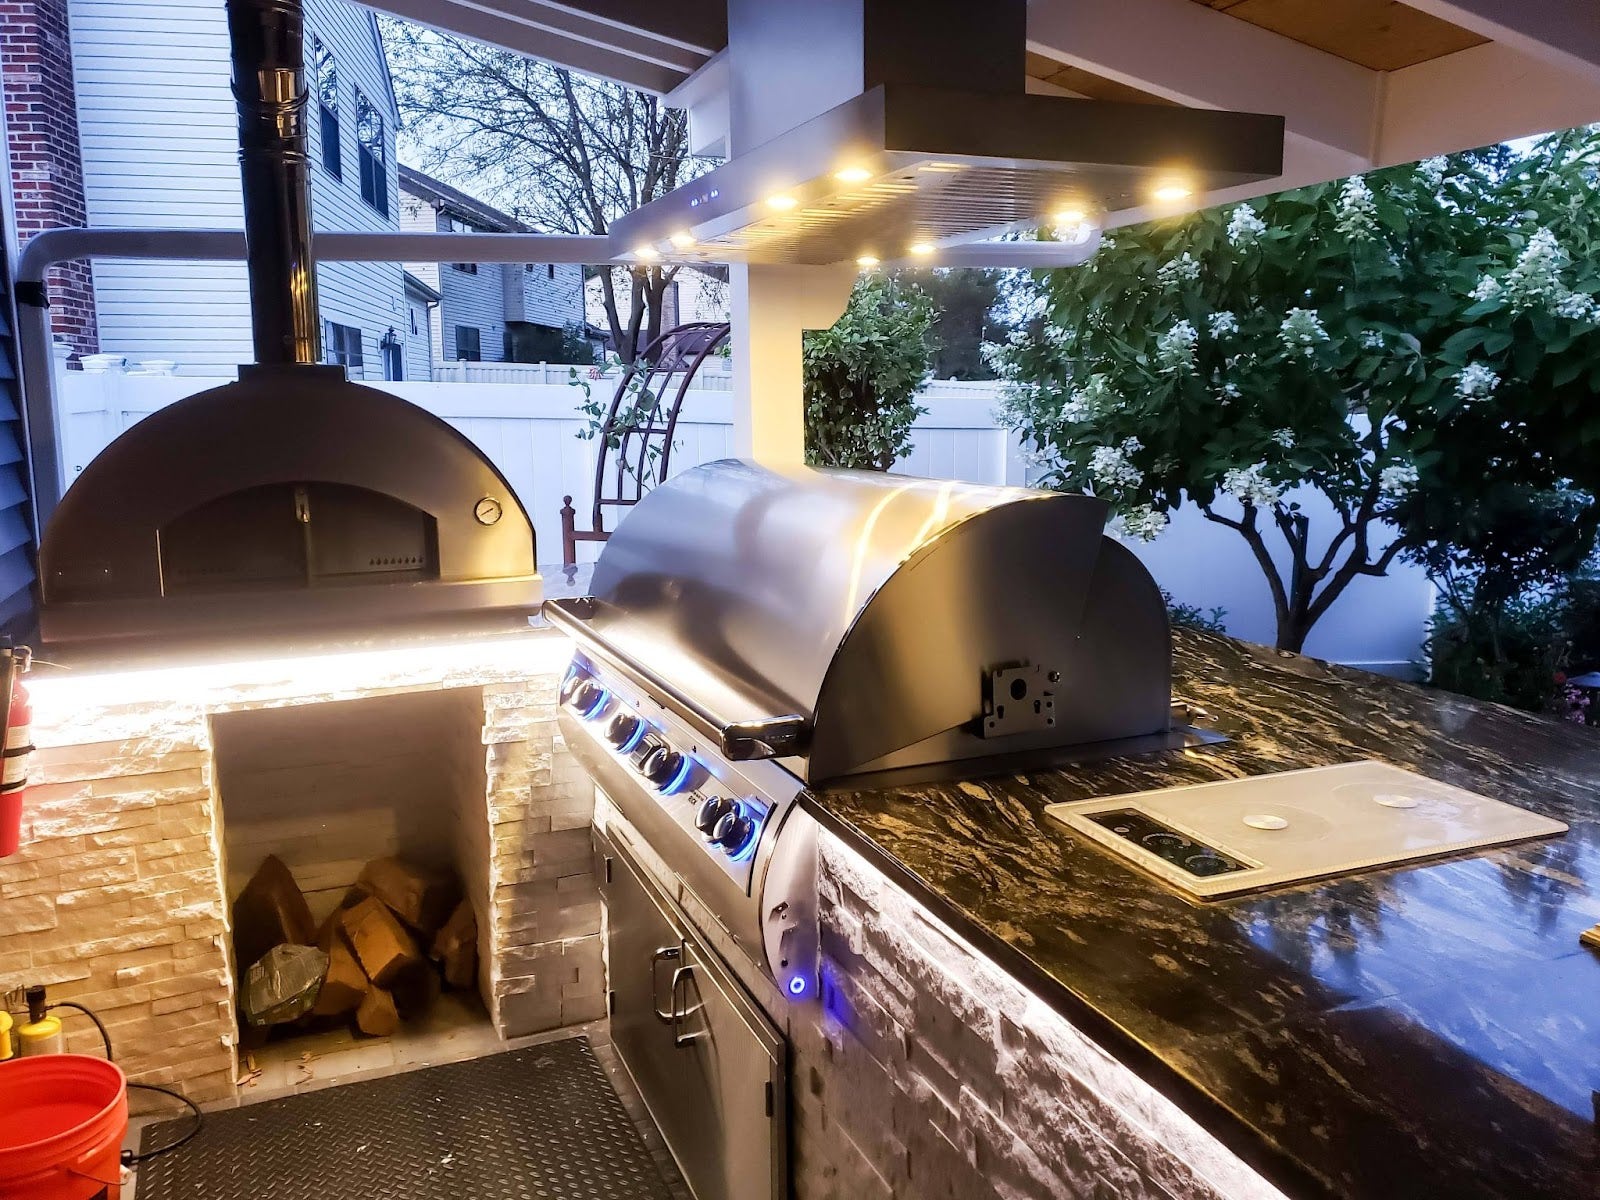 Alfresco Kitchen with Pizza Oven: This inviting outdoor kitchen features a matte black pizza oven, stainless steel grill, and Proline vent hood. Under-cabinet lighting creates a warm ambiance. Stone veneer and wood accents blend with the greenery for a sophisticated, earthy feel. - Proline Range Hoods - prolinerangehoods.com 